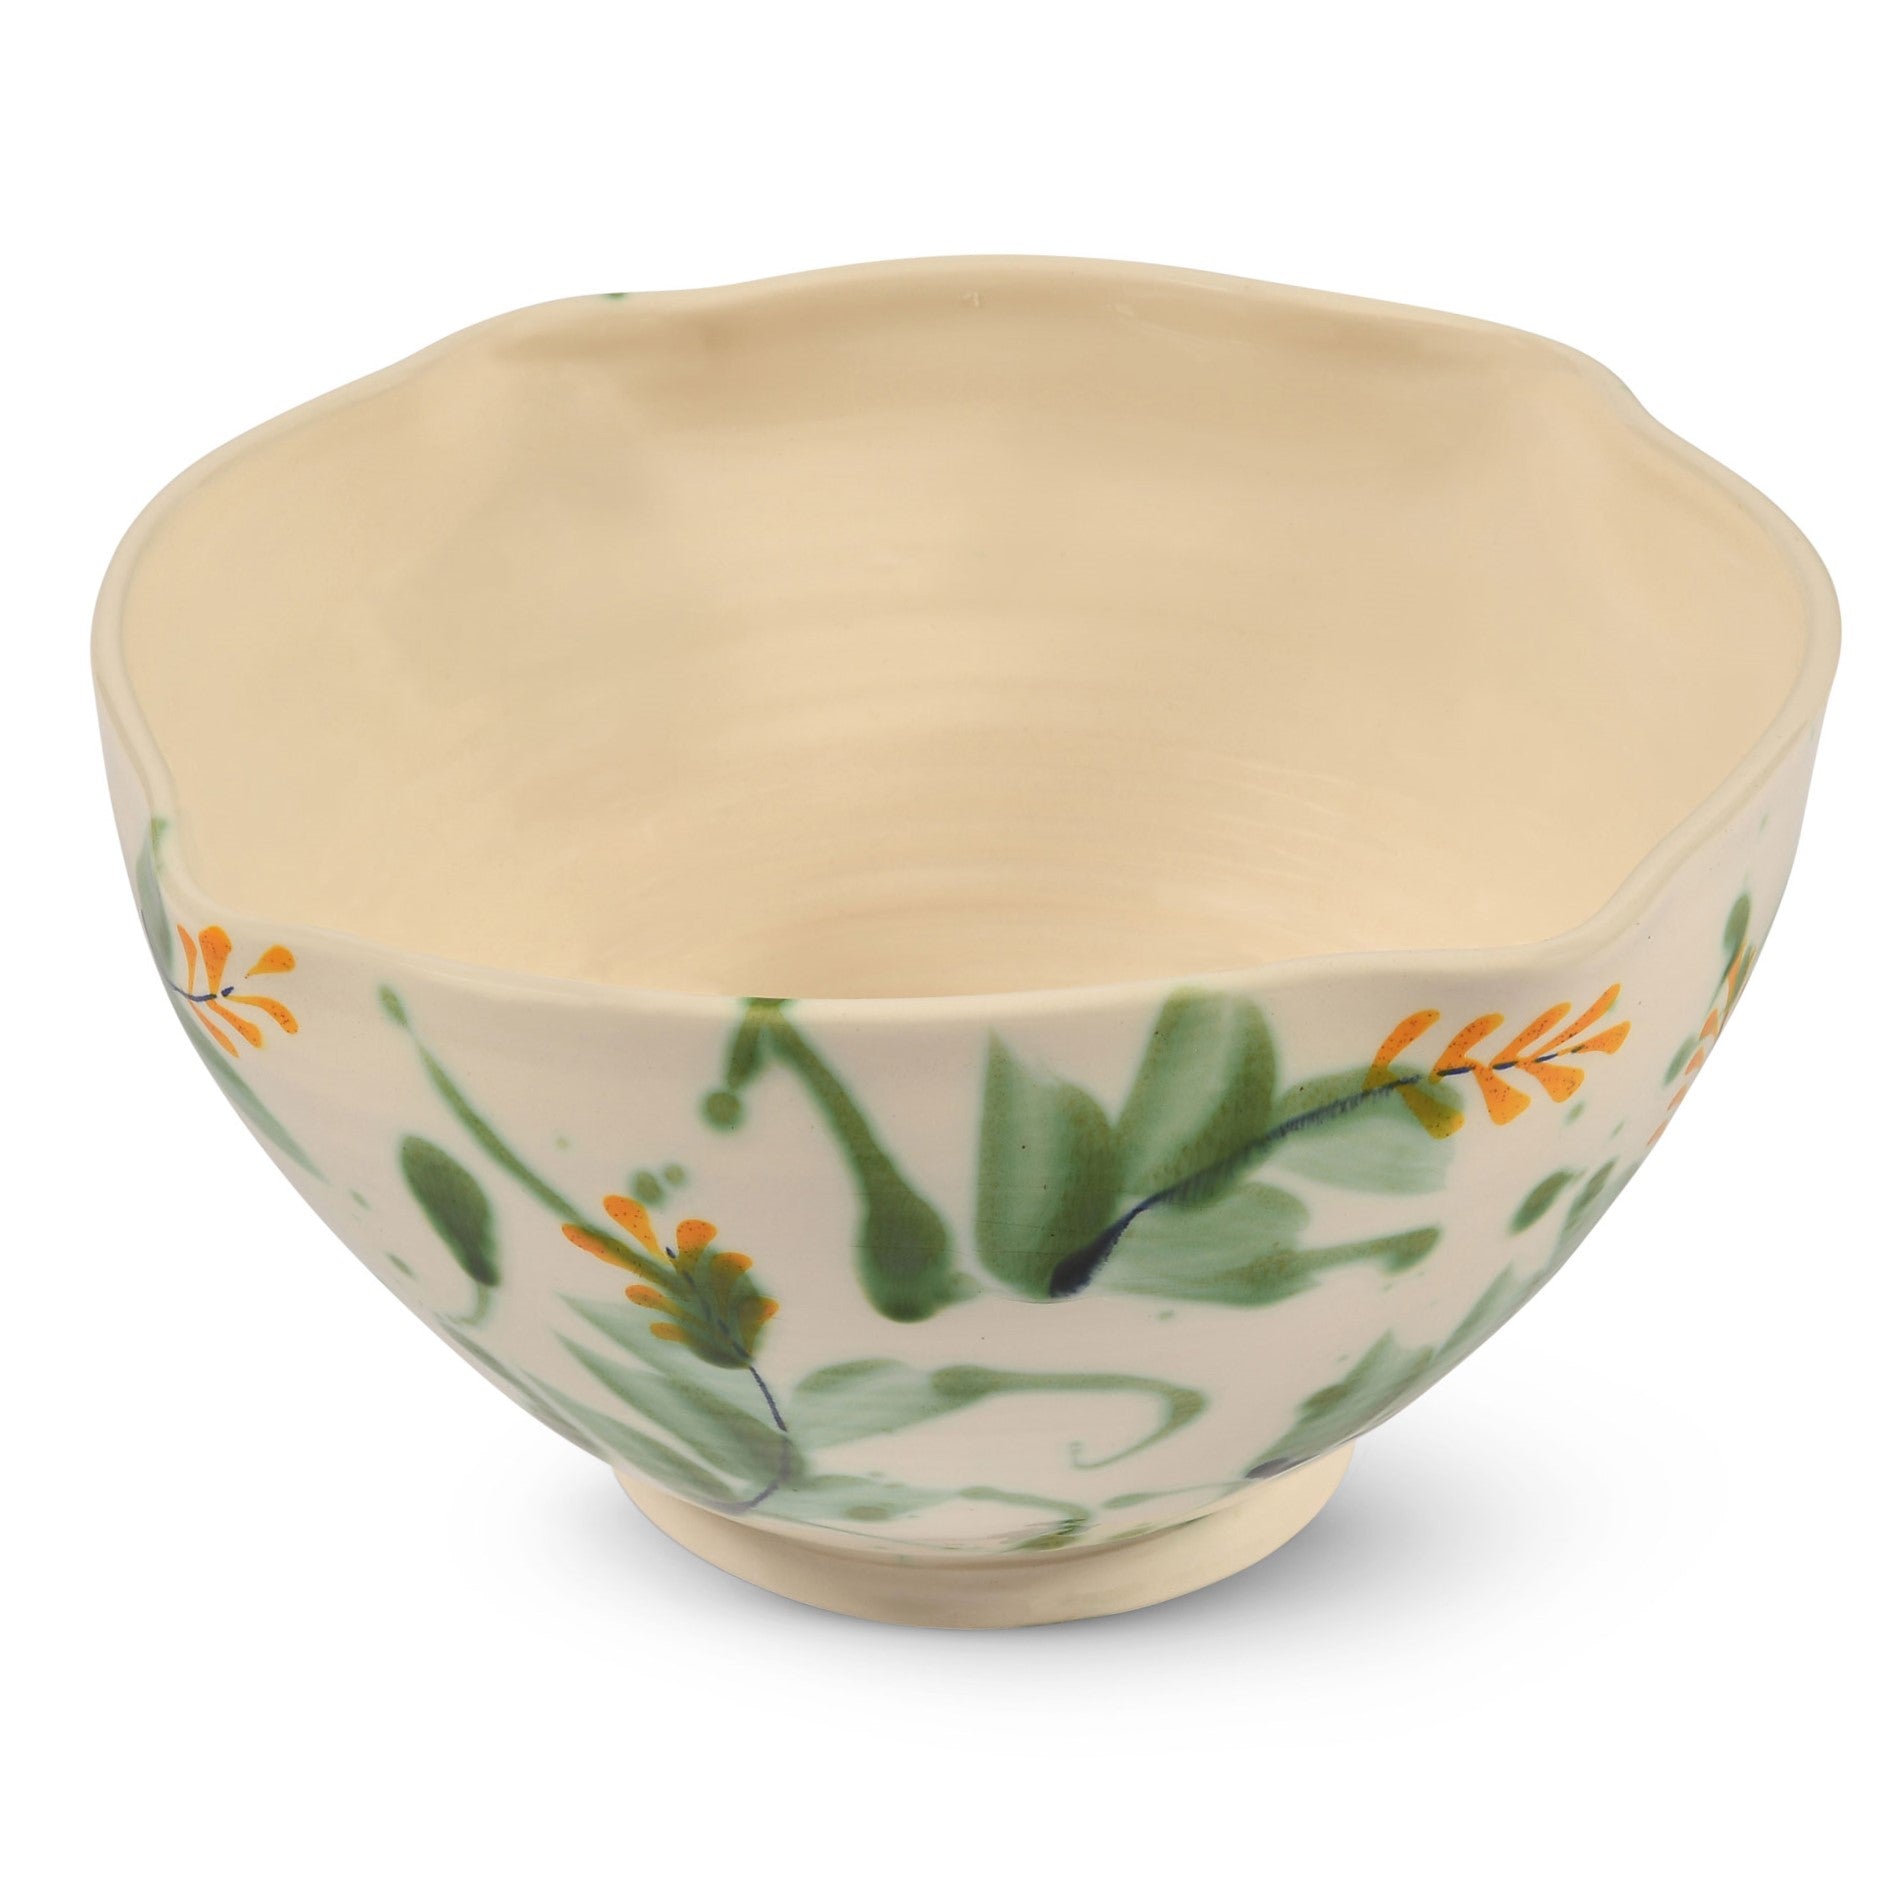 Ceramic%20Round%20Serving%20Salad%20Bowl%20With%20Yellow%20Wheat%20Motifs image 1